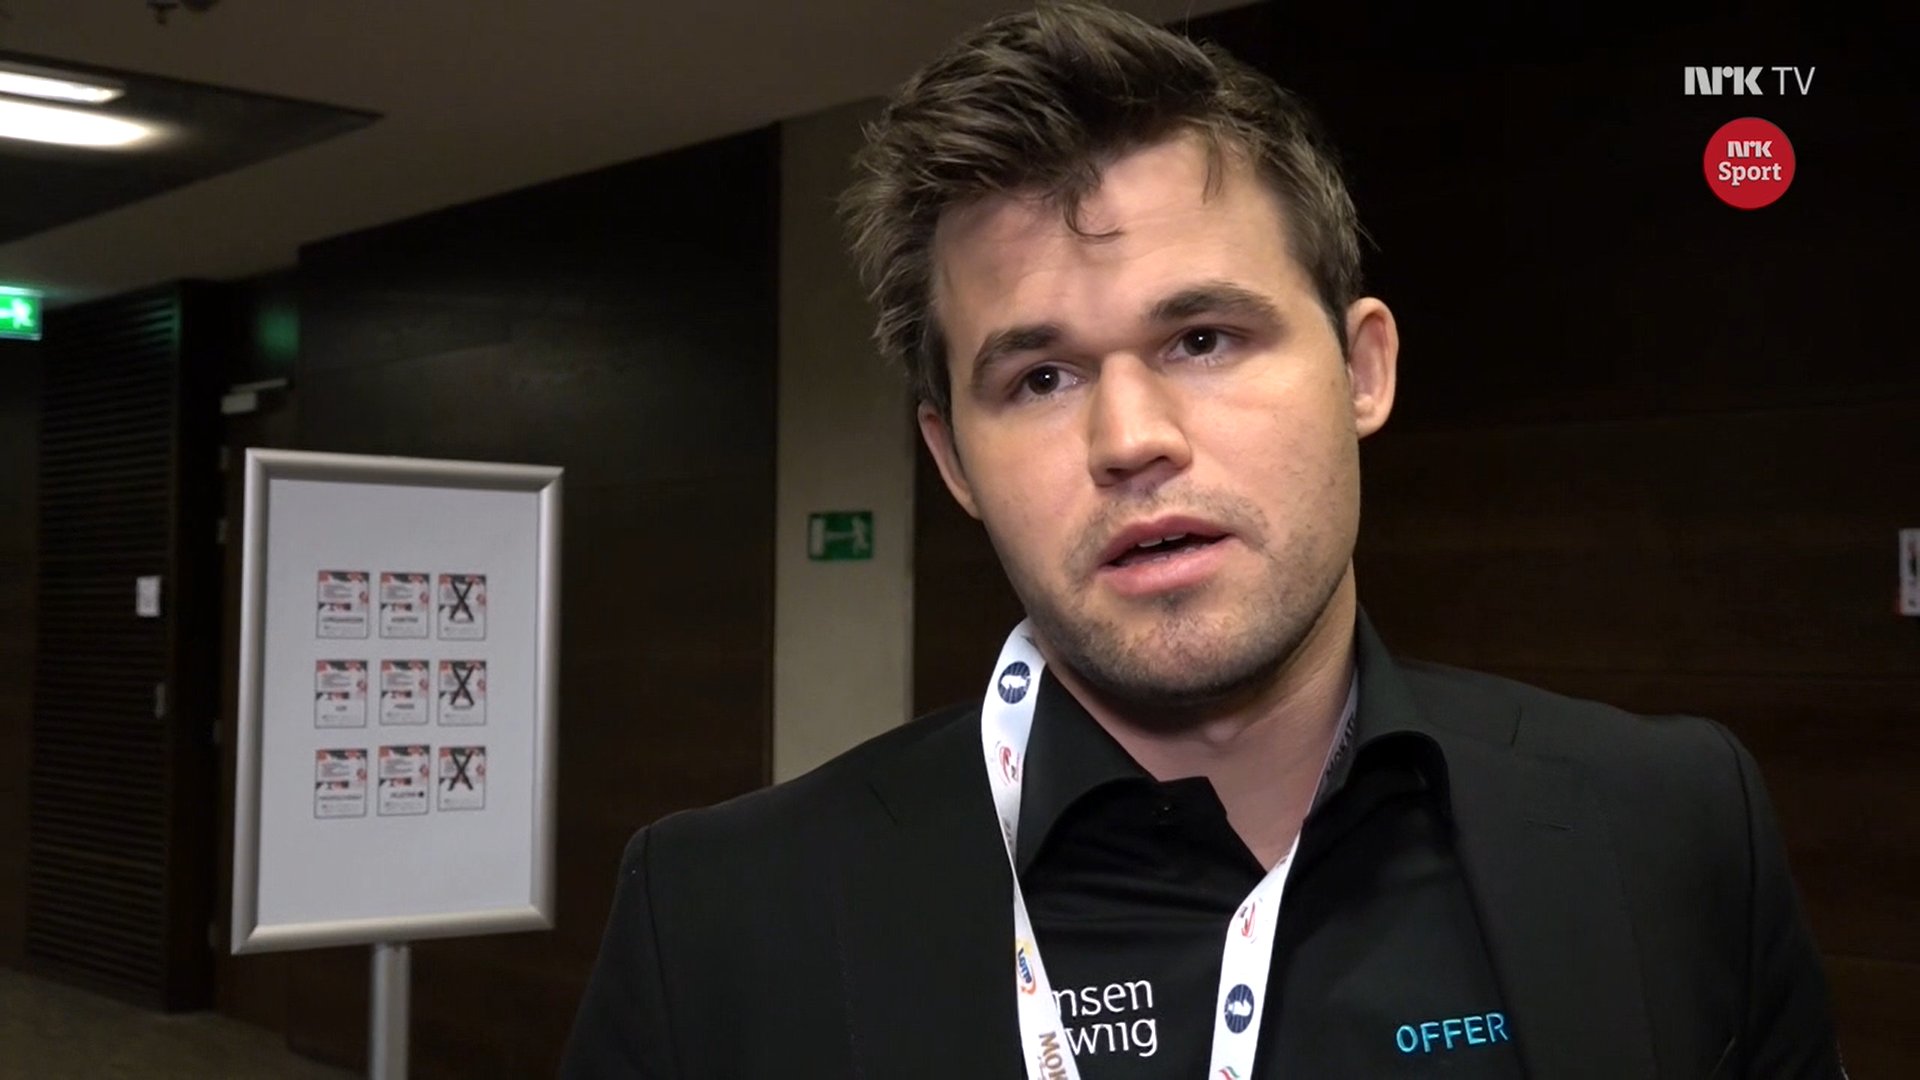 Carlsen lashes out at “completely idiotic” tiebreak rules